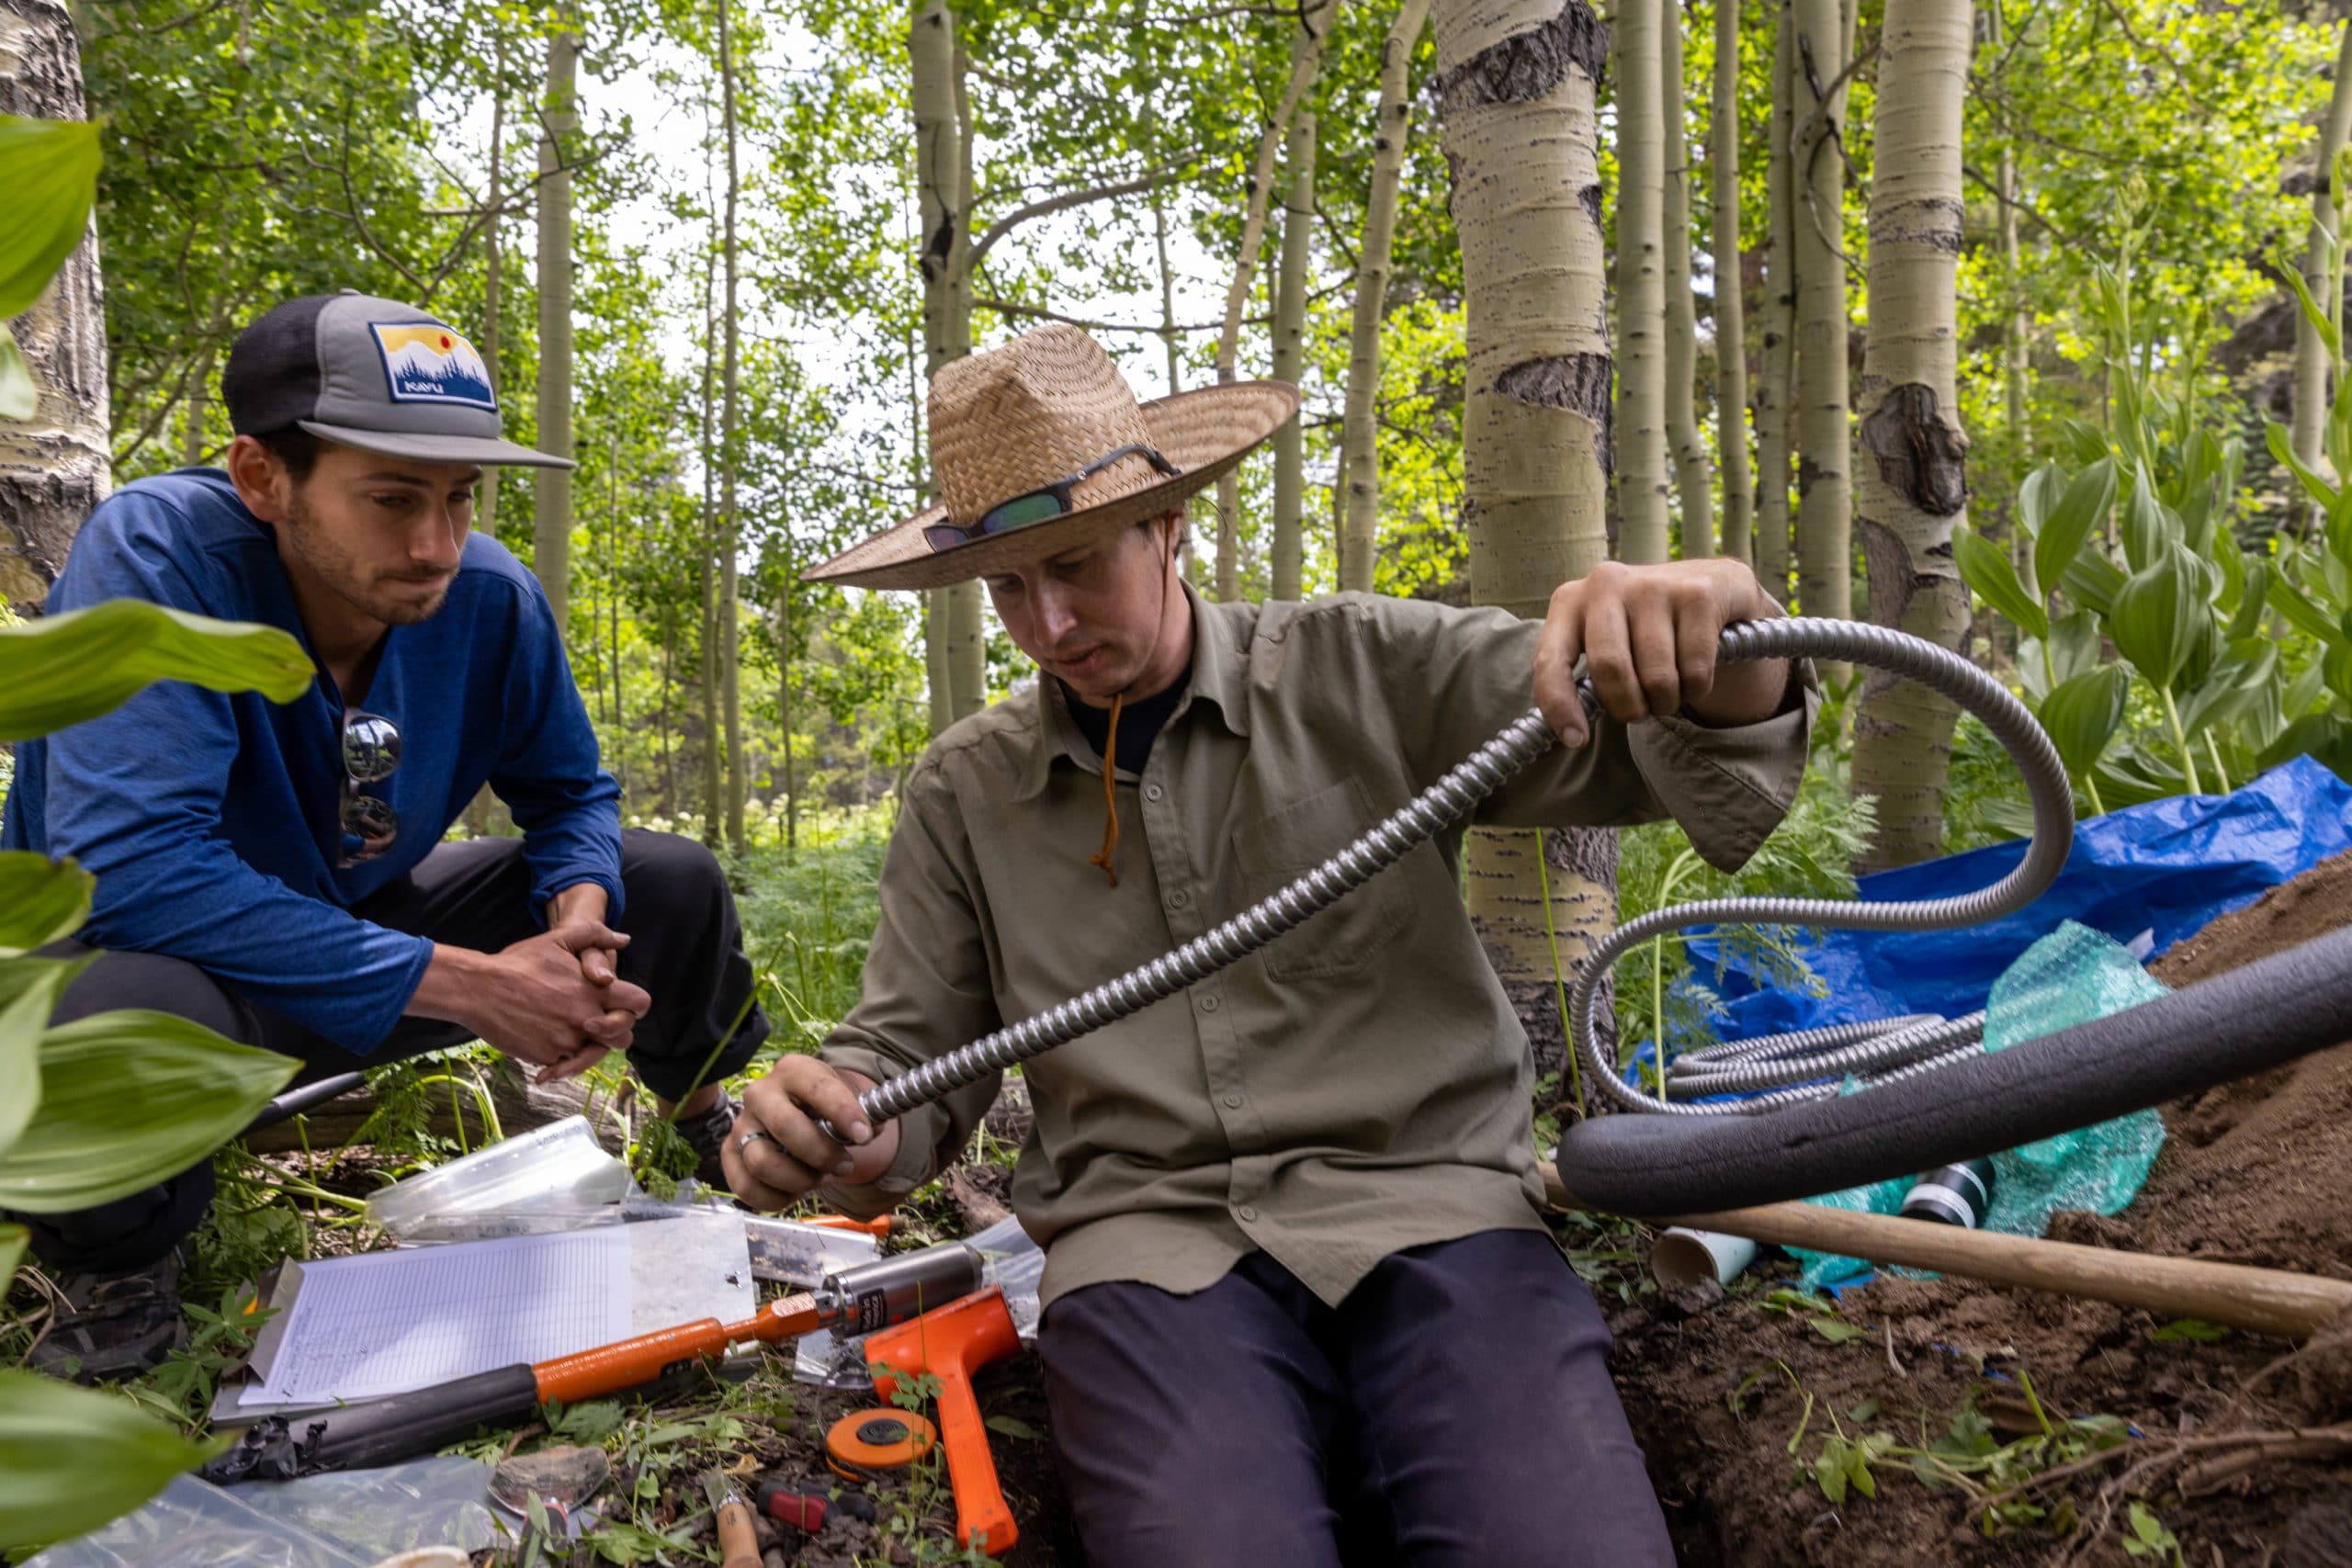 Professor and student working on a lab project in the woods.